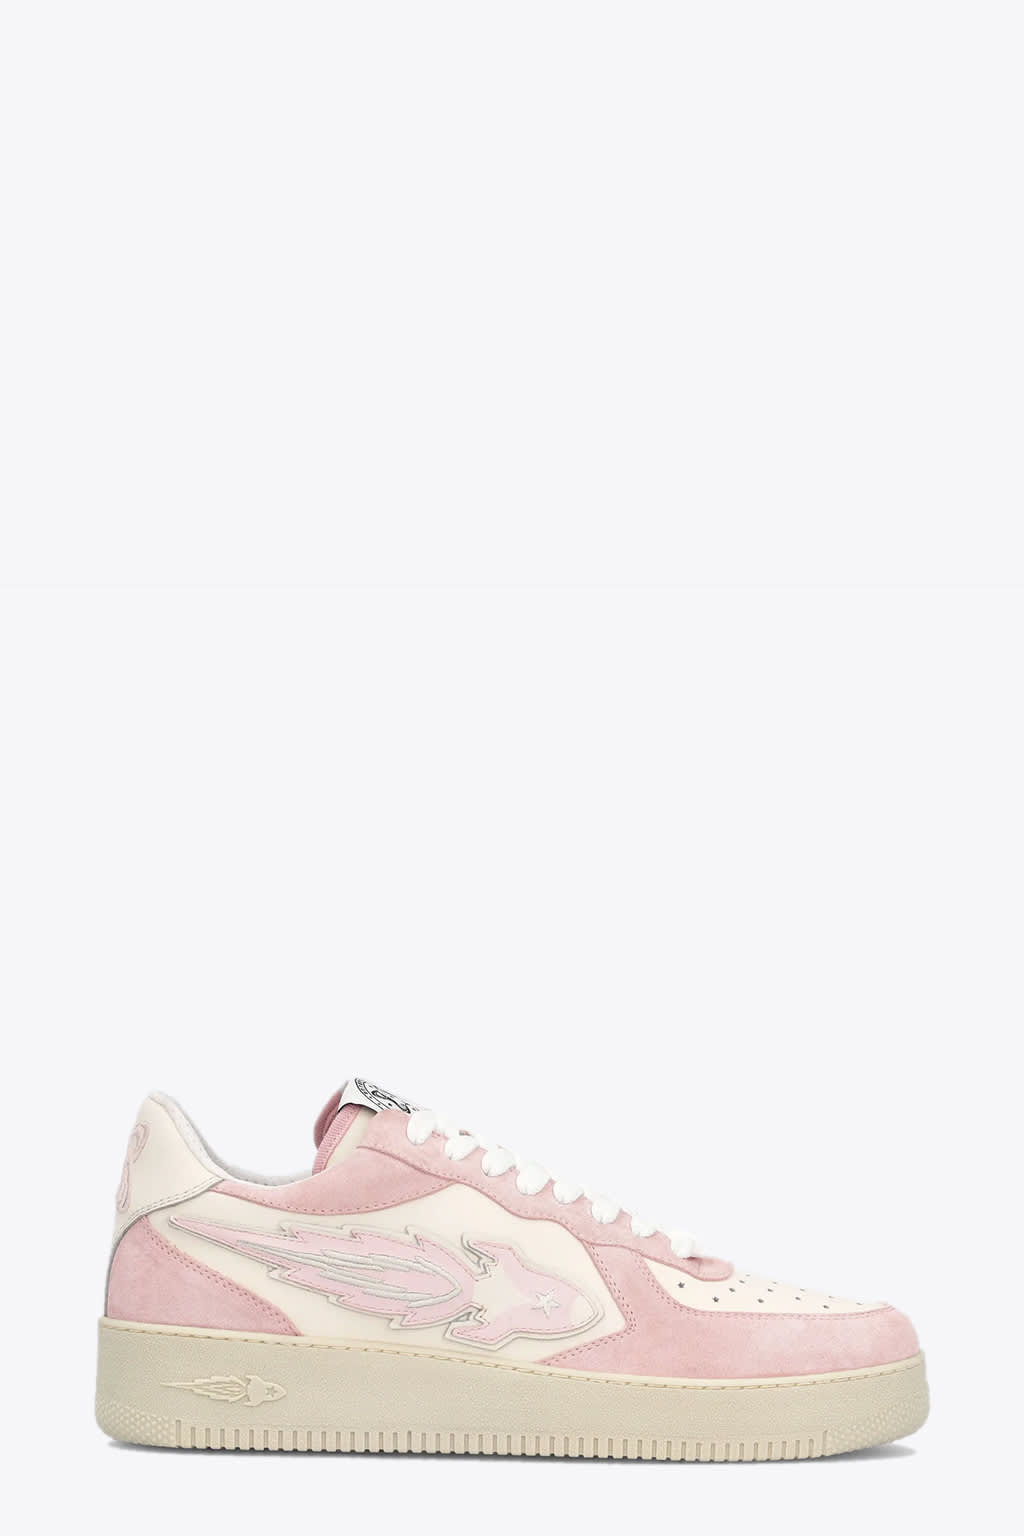 Enterprise Japan New Drop Low Off-white leather and pink suede low sneakers with side rocket